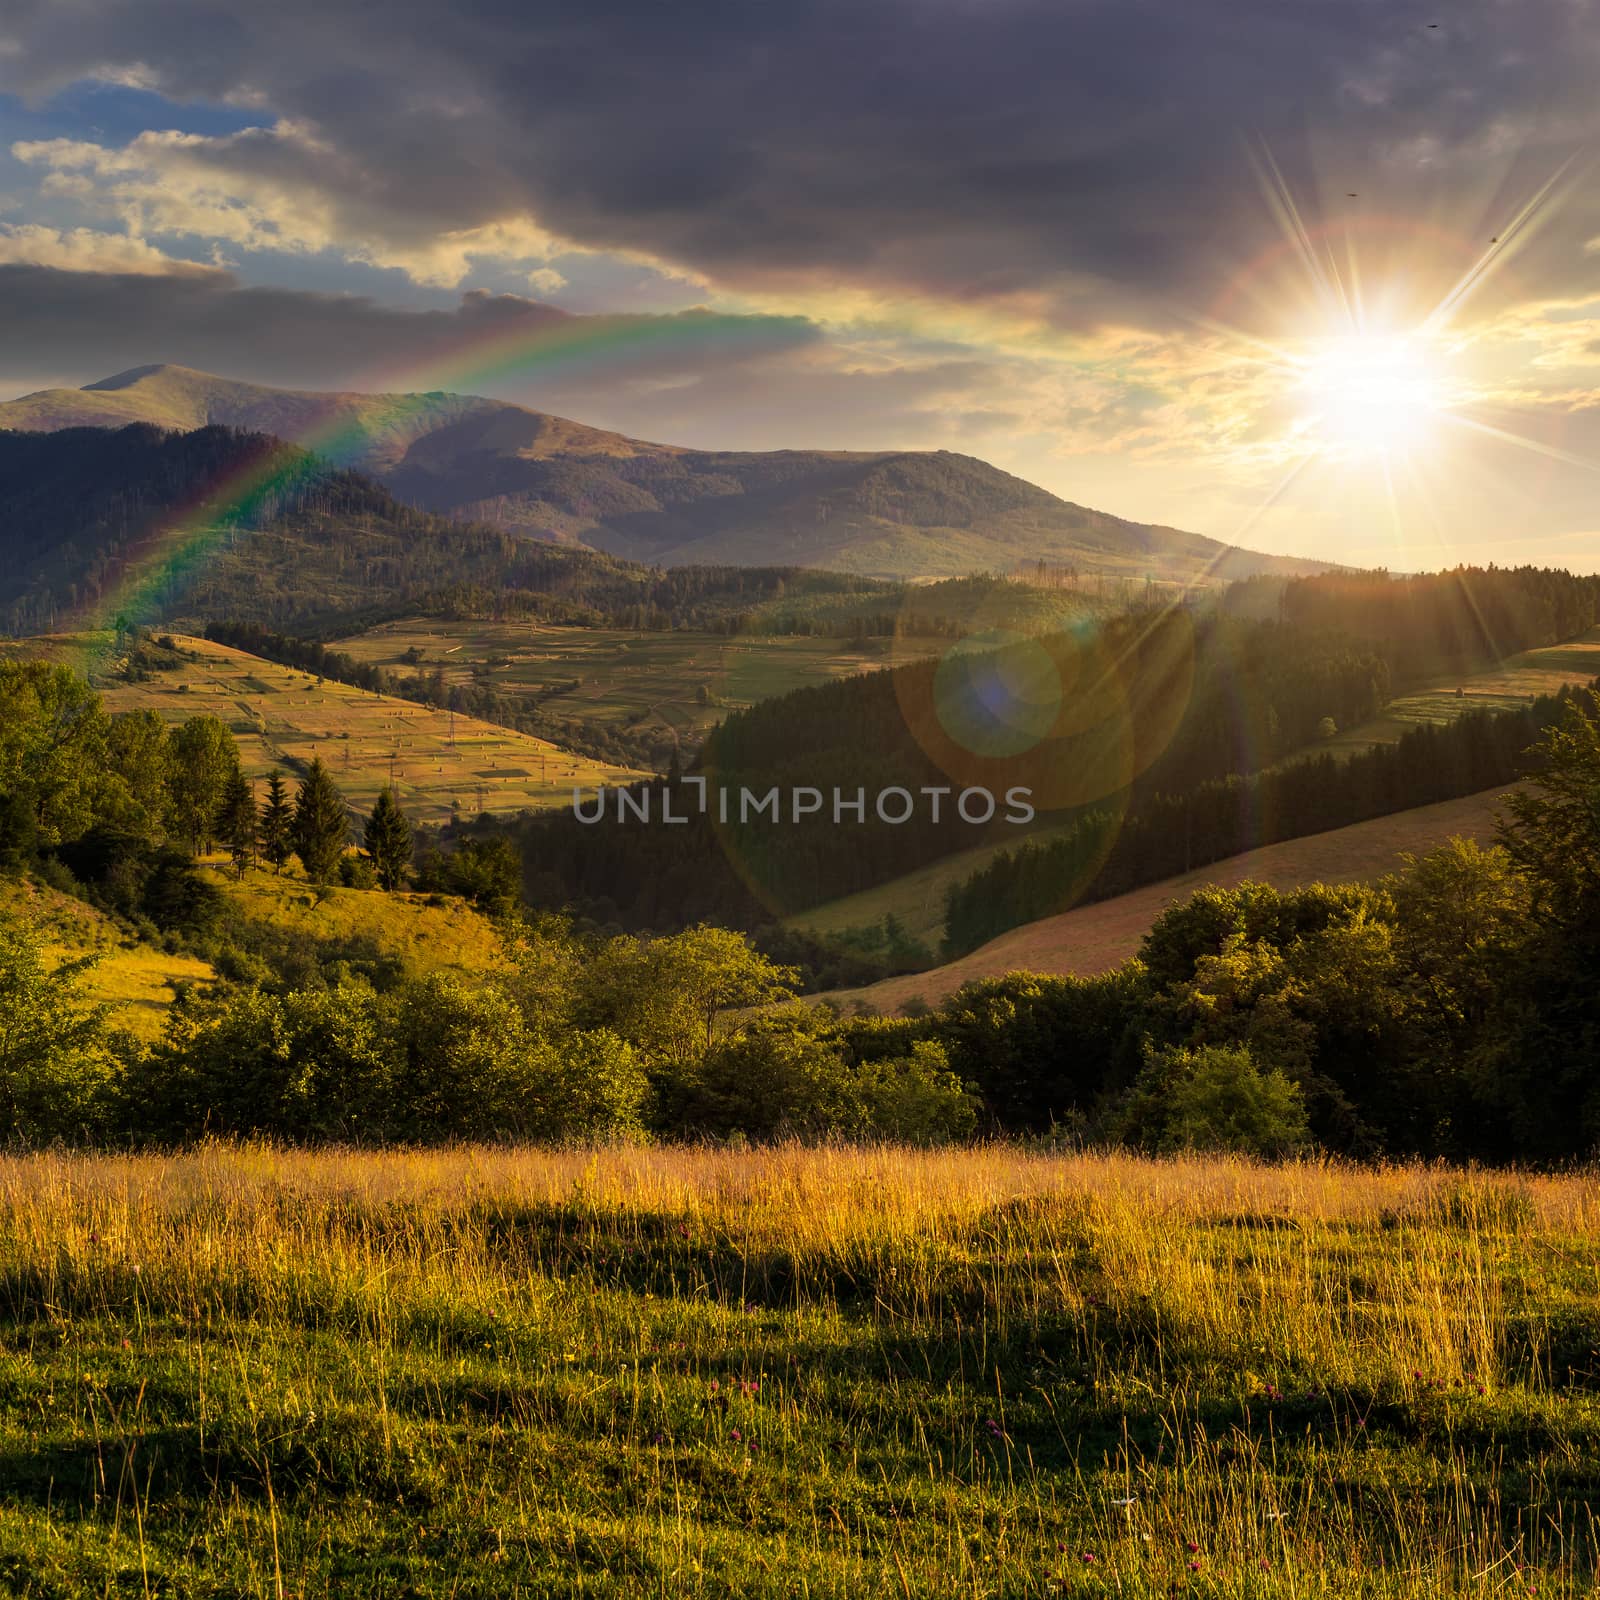 meadow on hillside near forest in mountains at sunset with rainbow